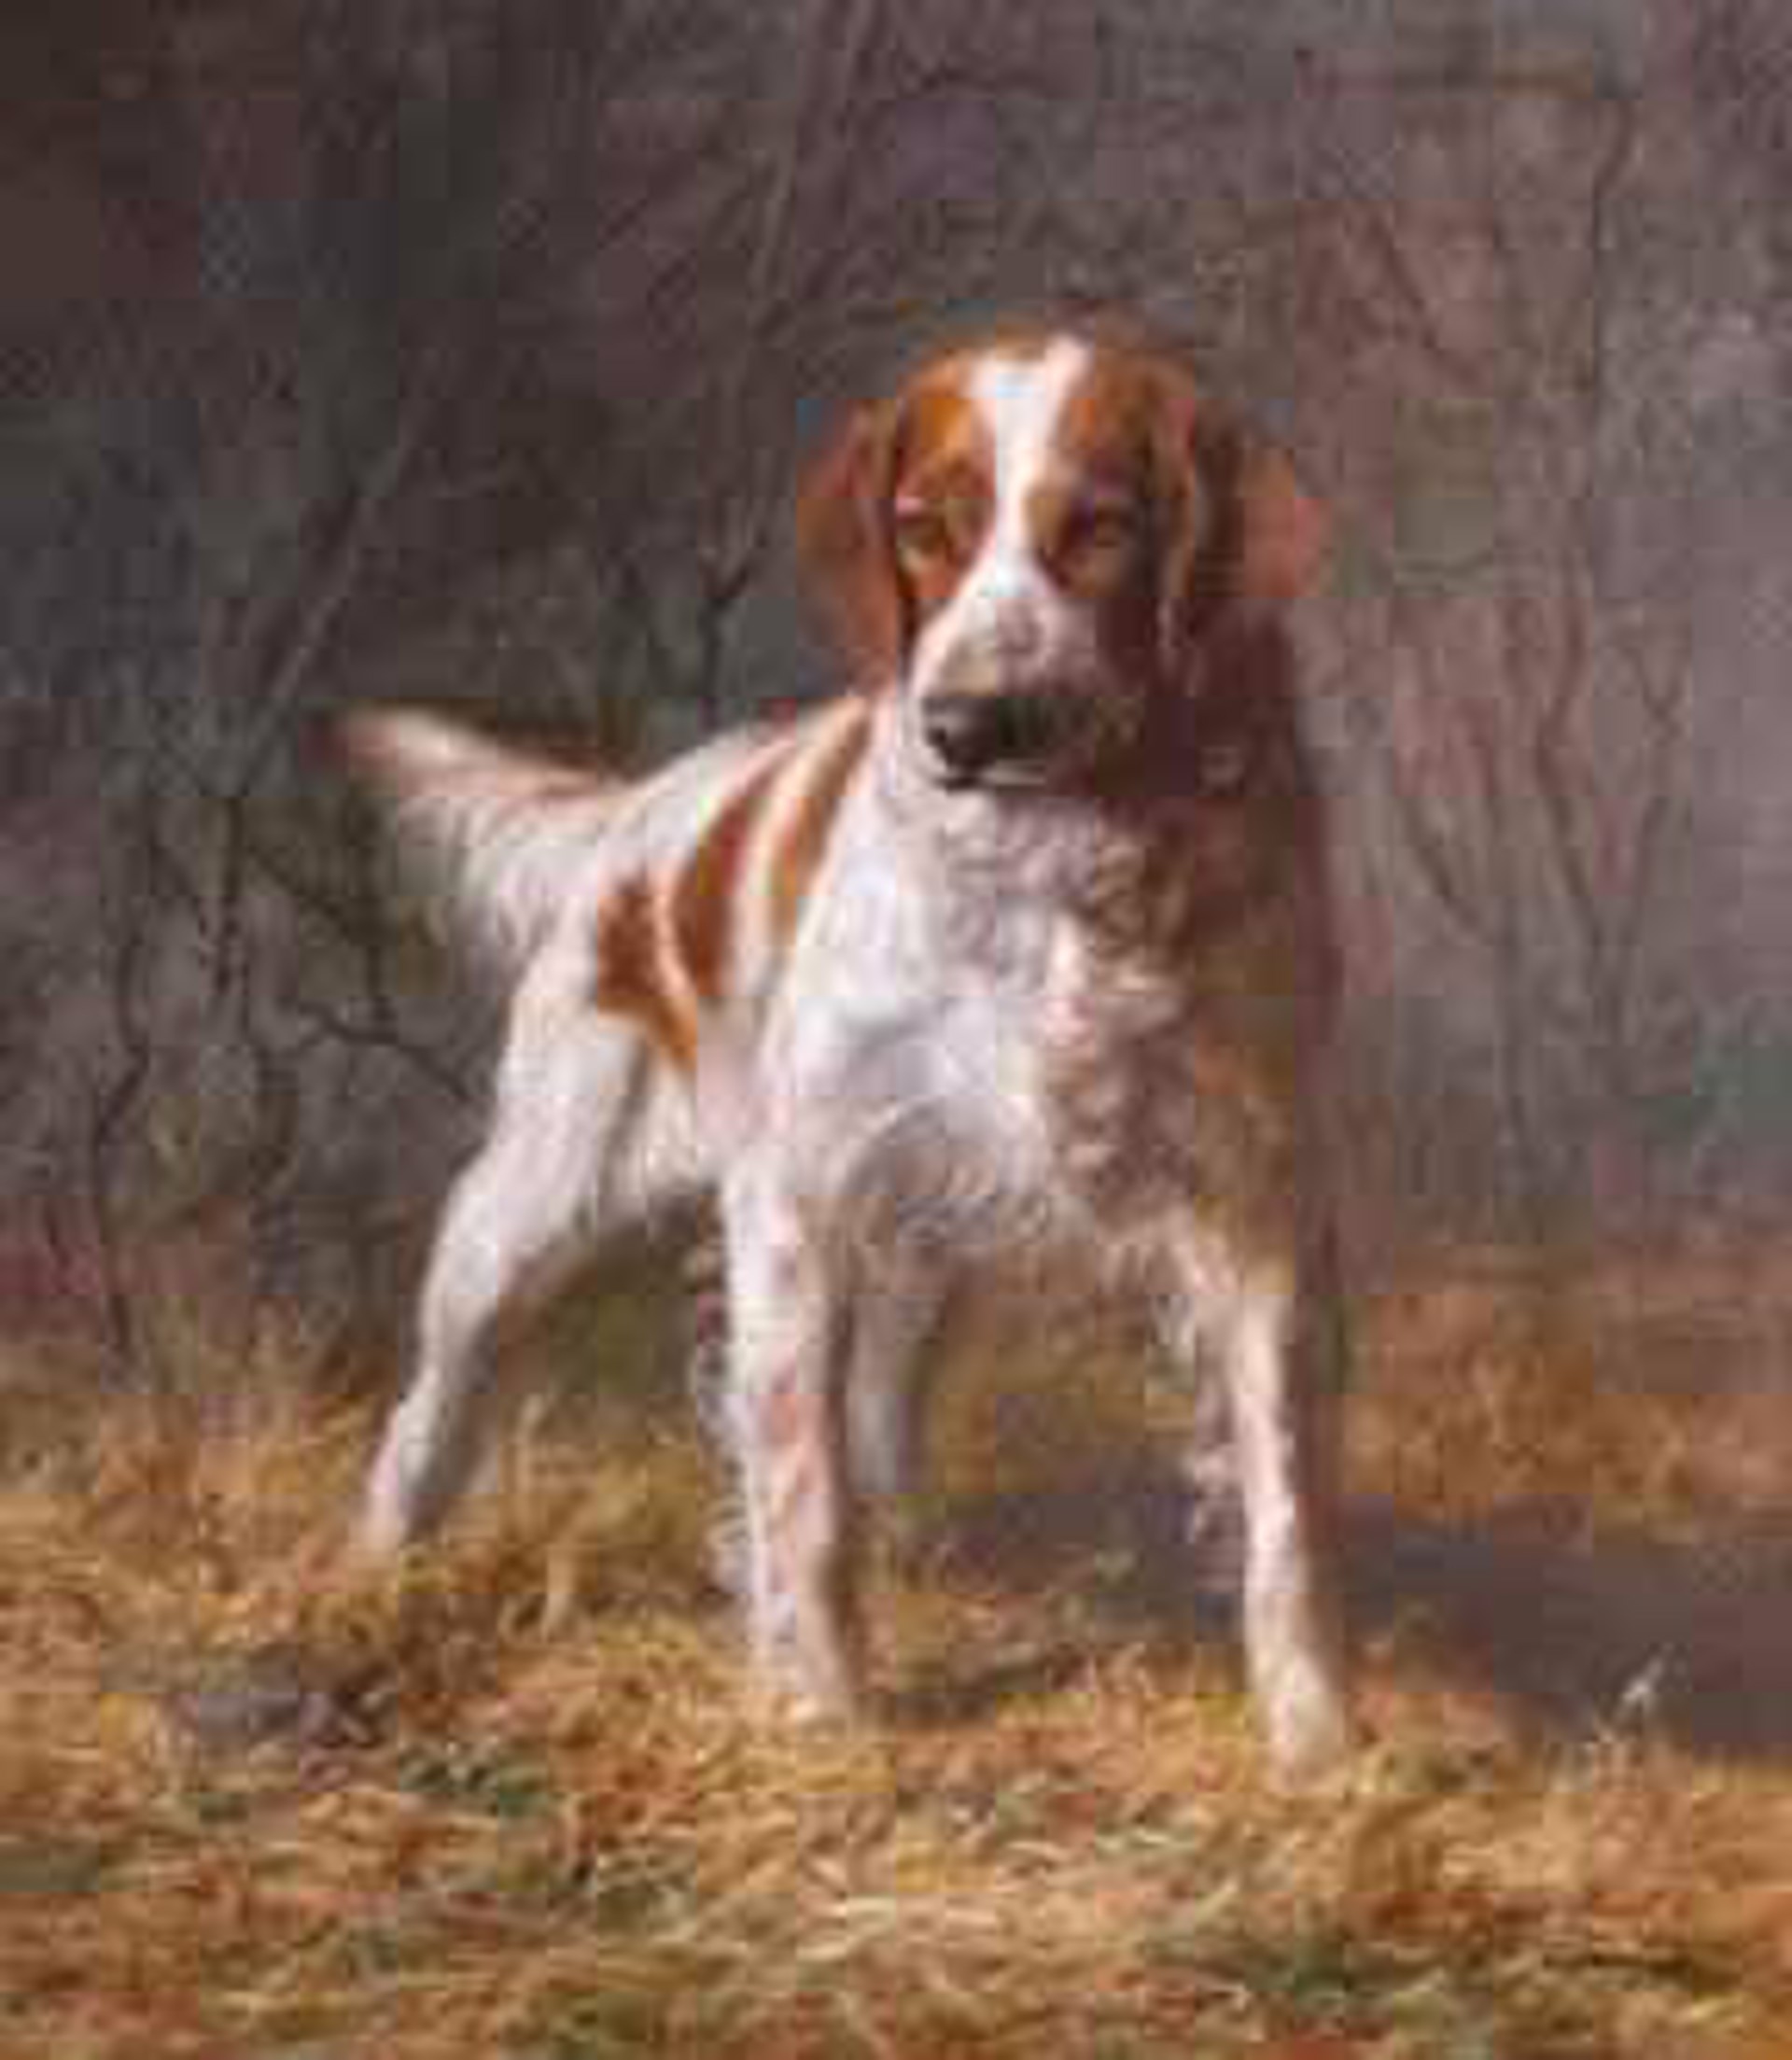 Setter in a Wooded Landscape by Franklin Whiting Rogers